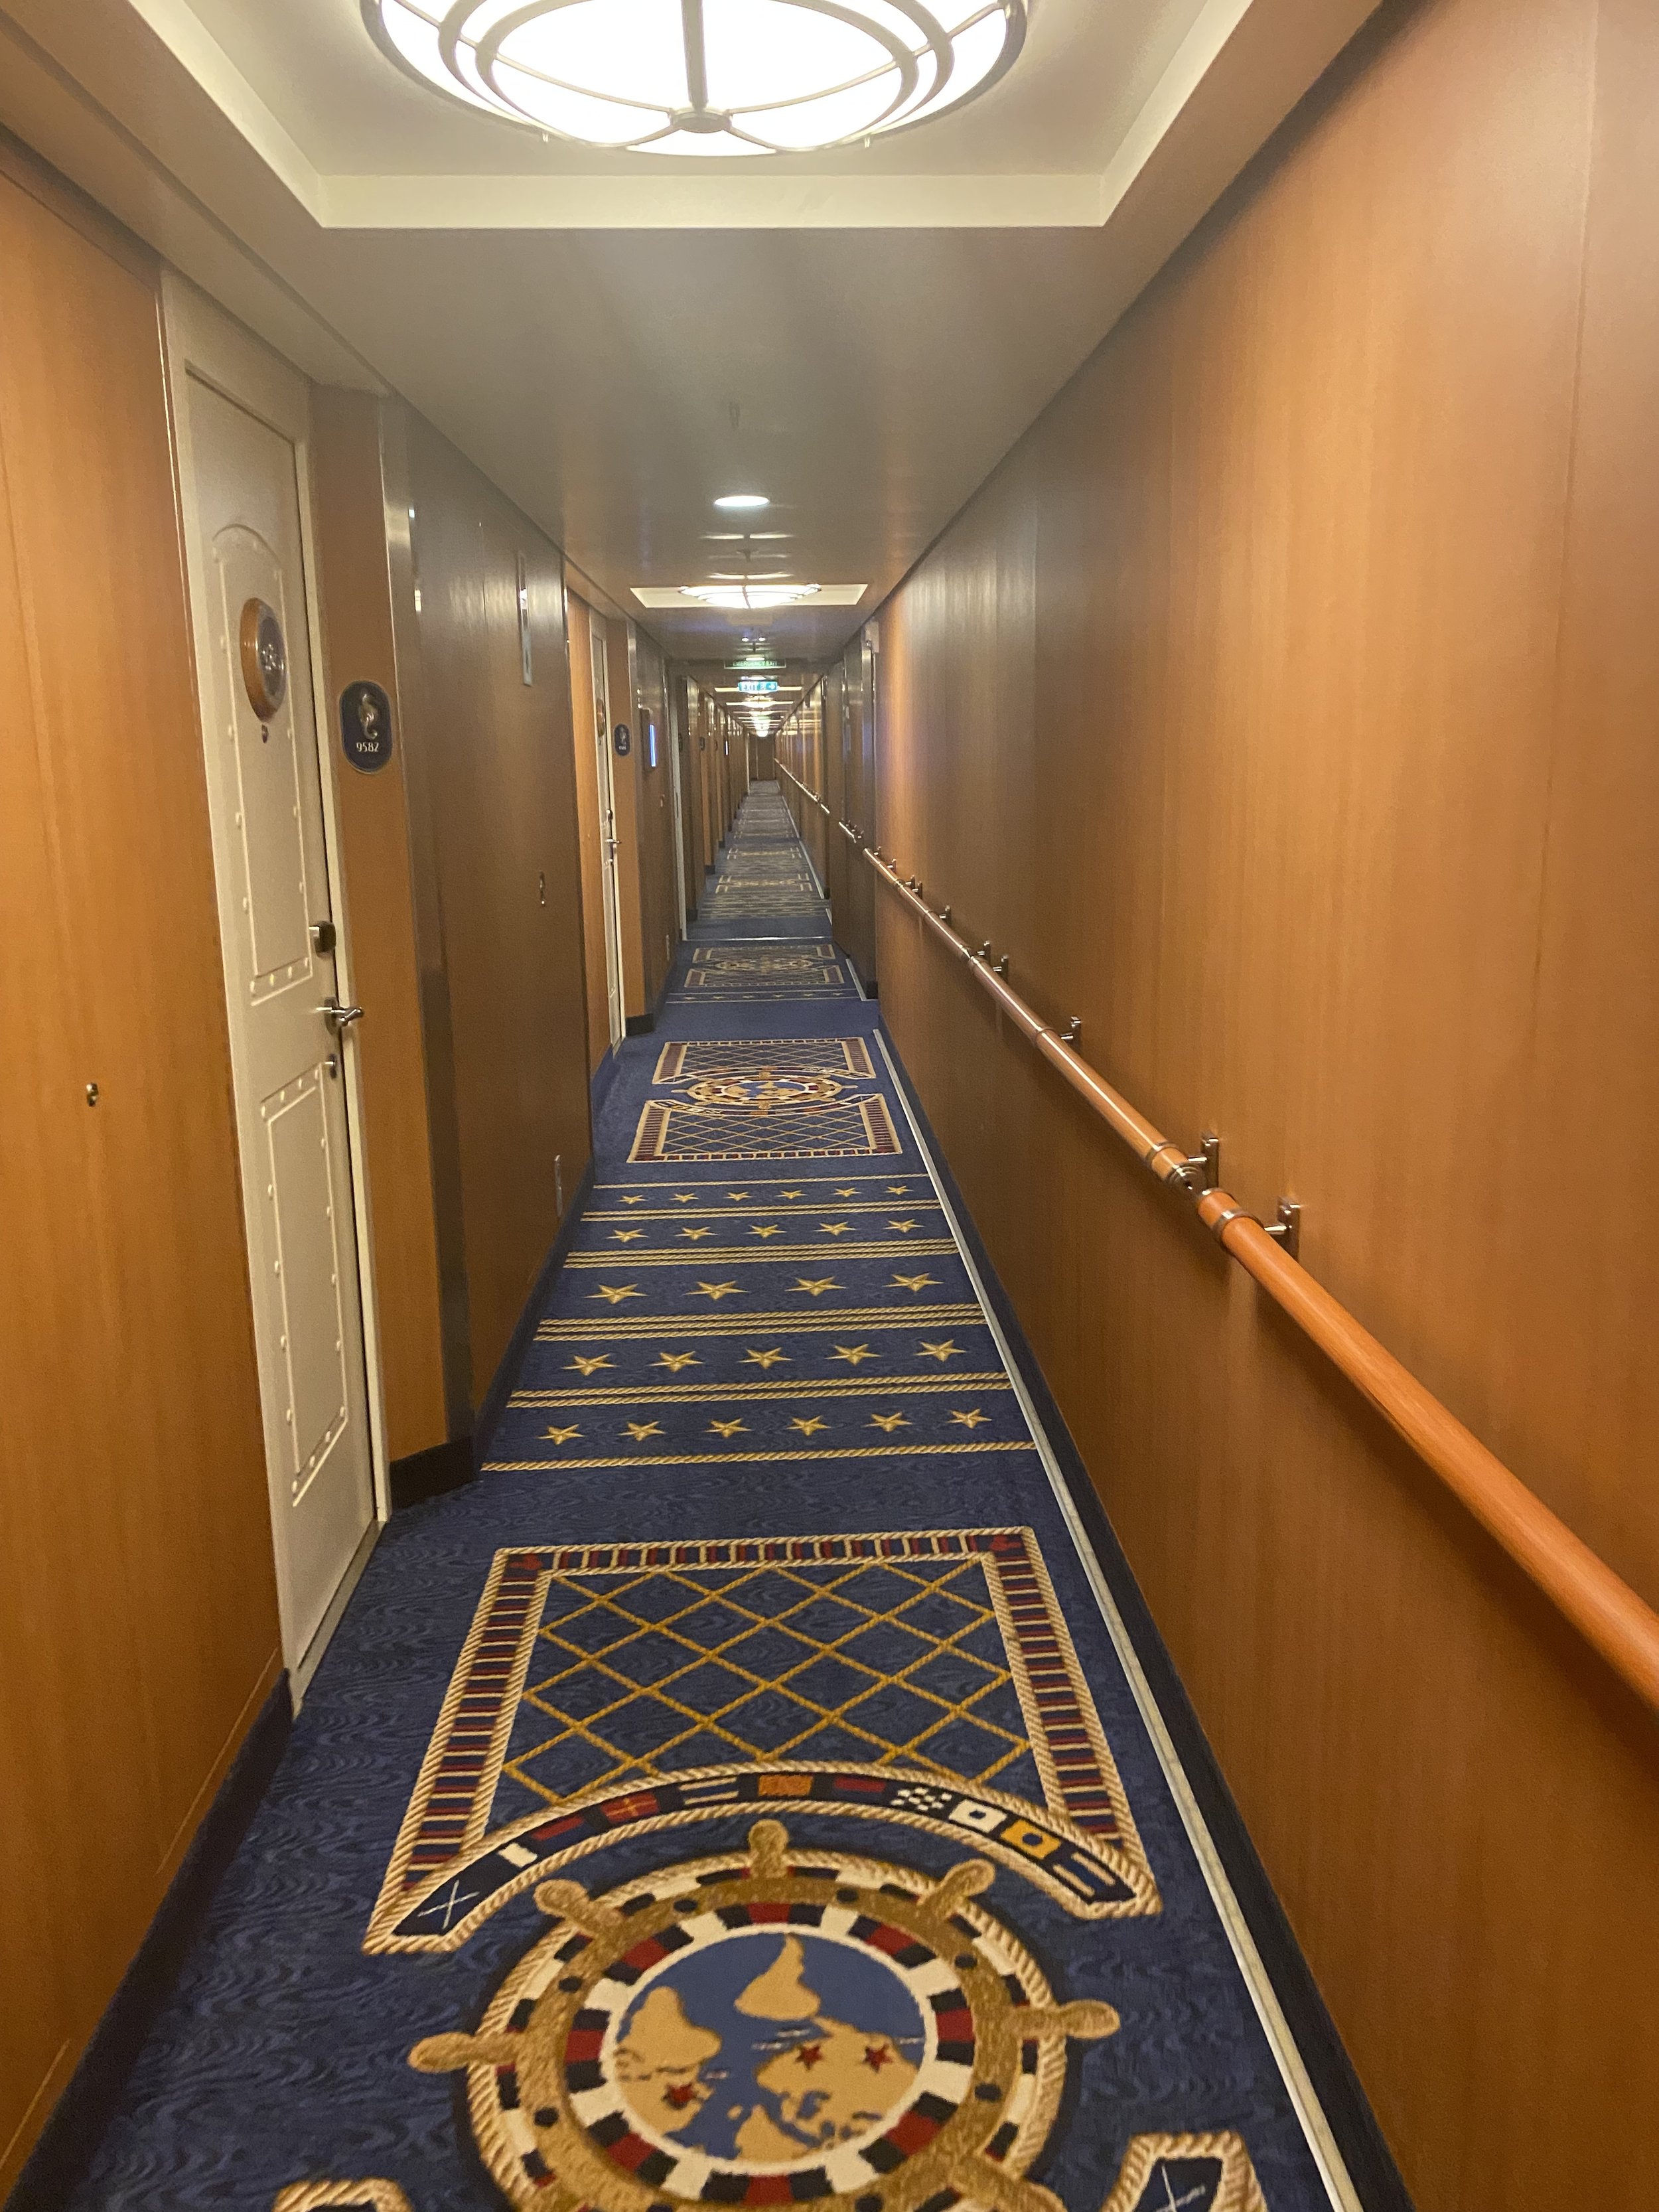  After the first day, you learn your way around the ship. The hallways are endless - the Disney Dream is massive ship.  